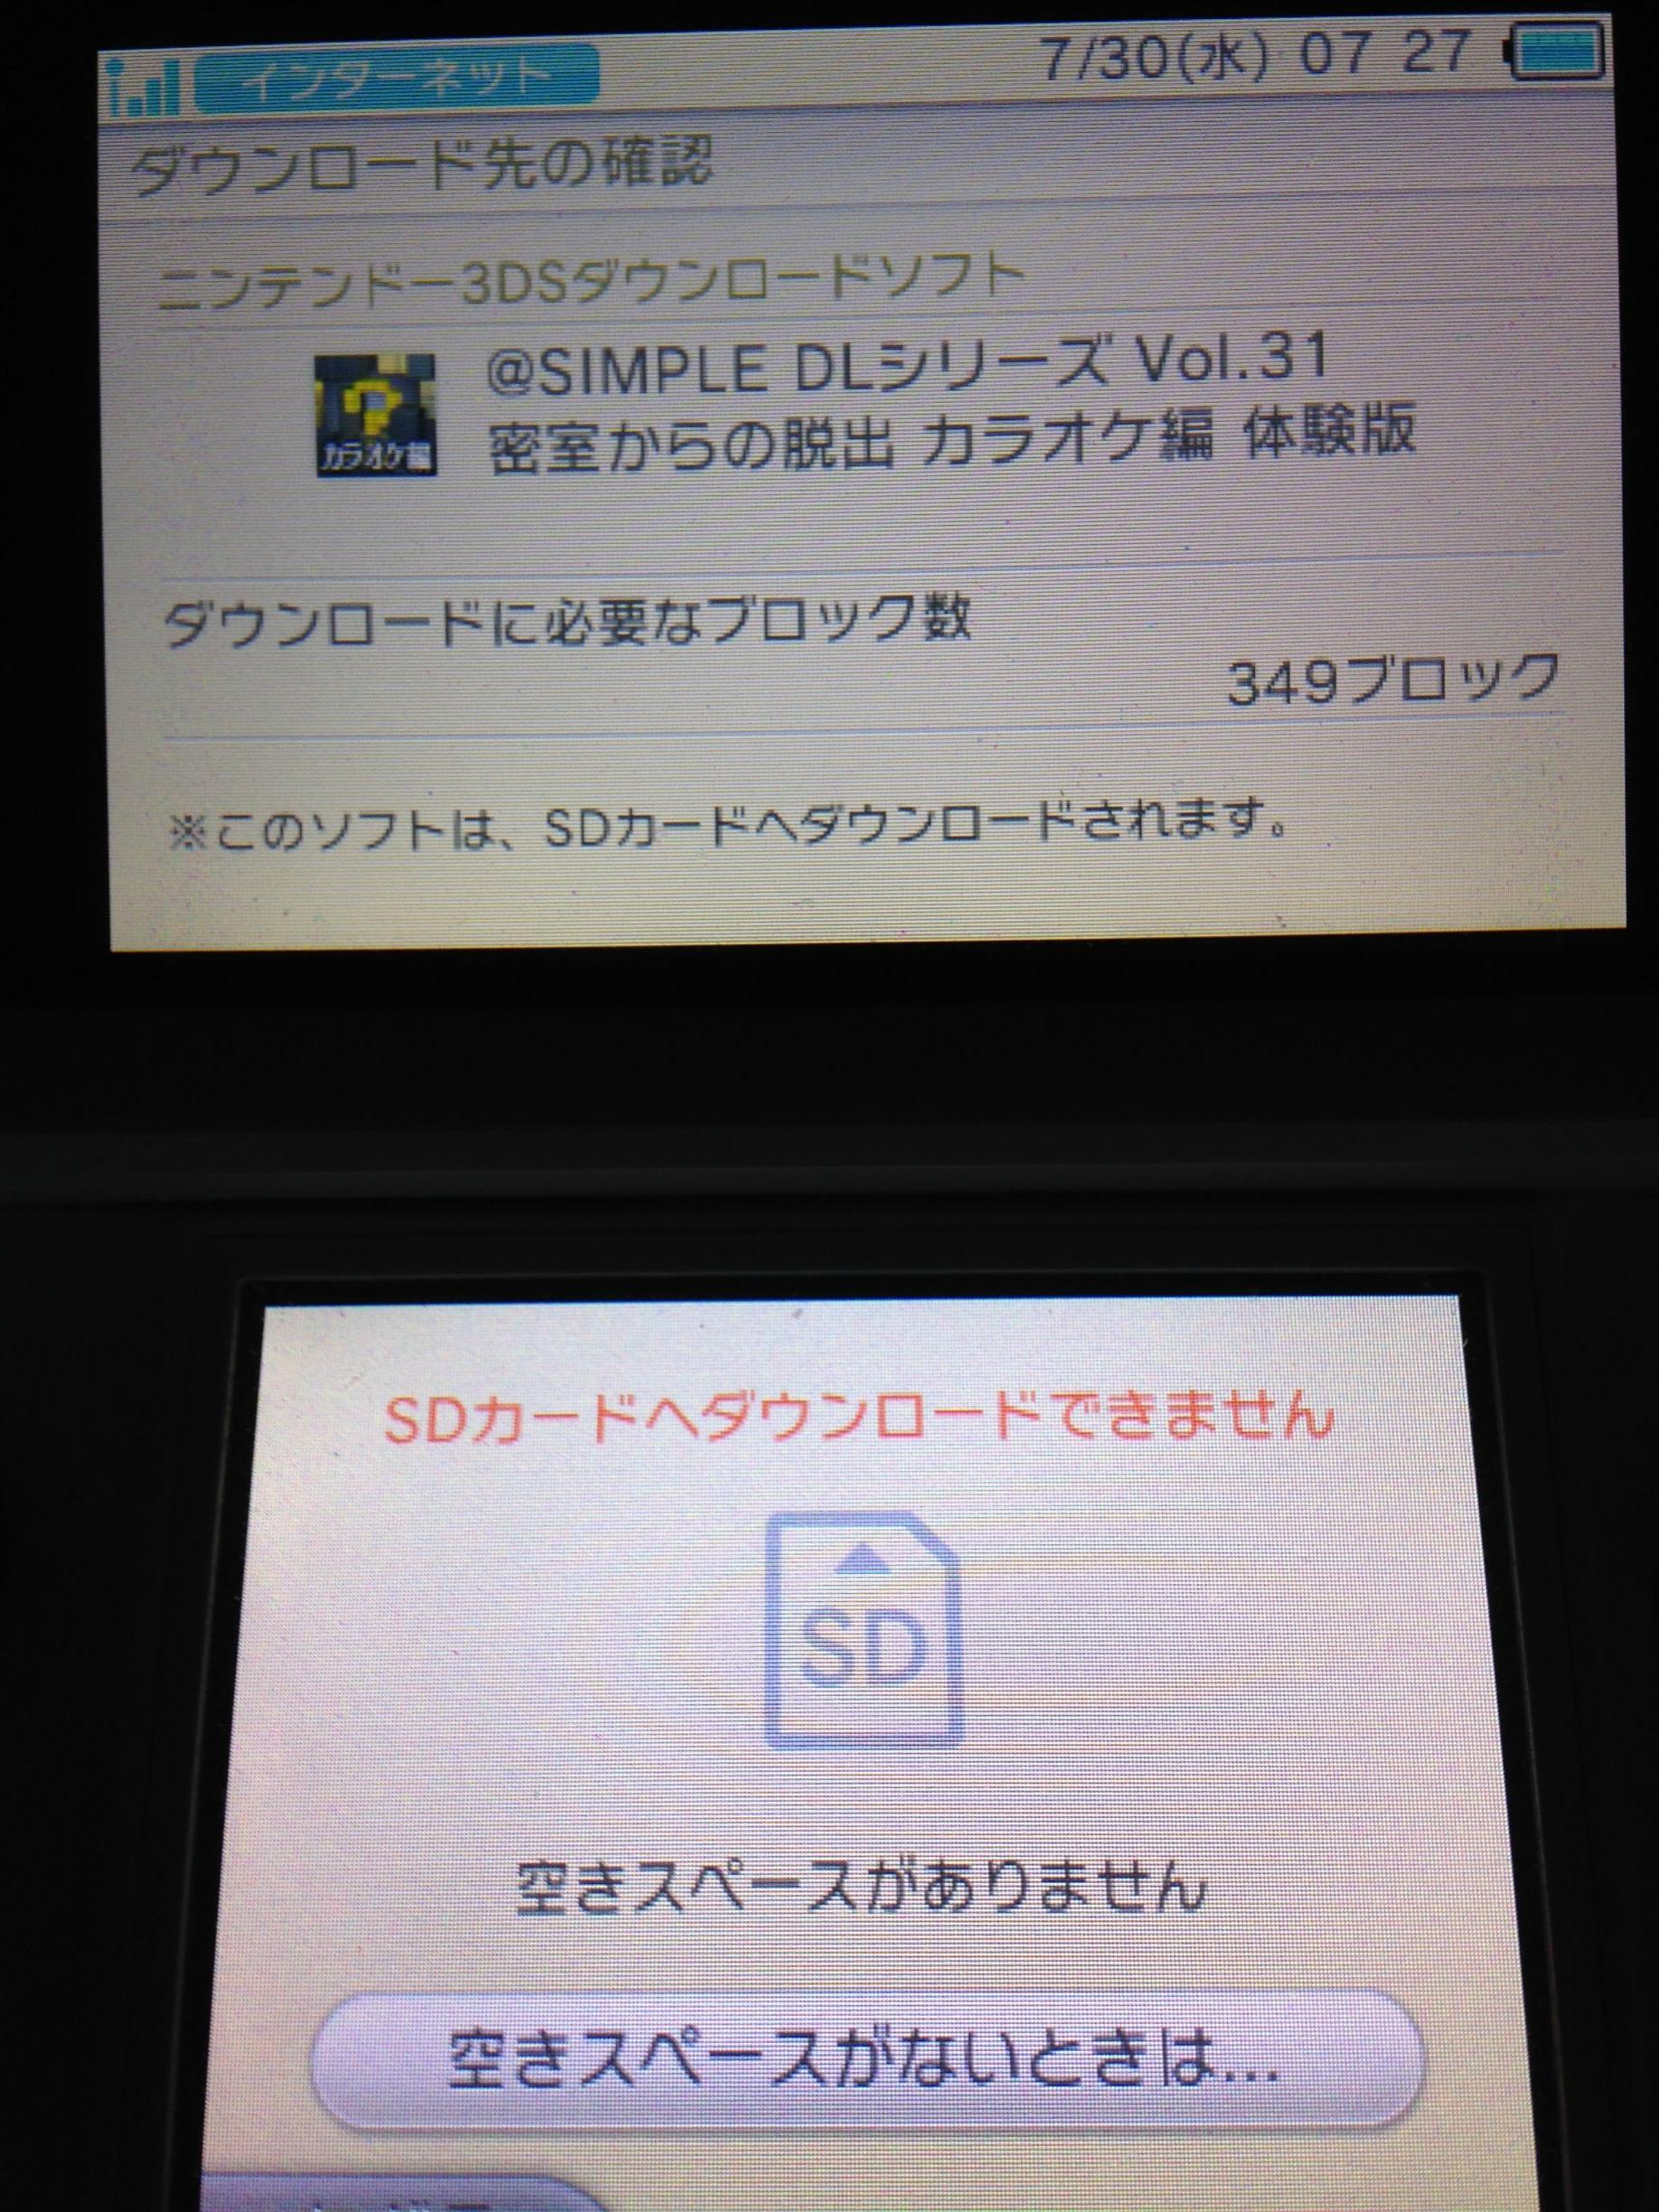 3ds Only Supports 300 Installed Apps At Once Nintendo Everything